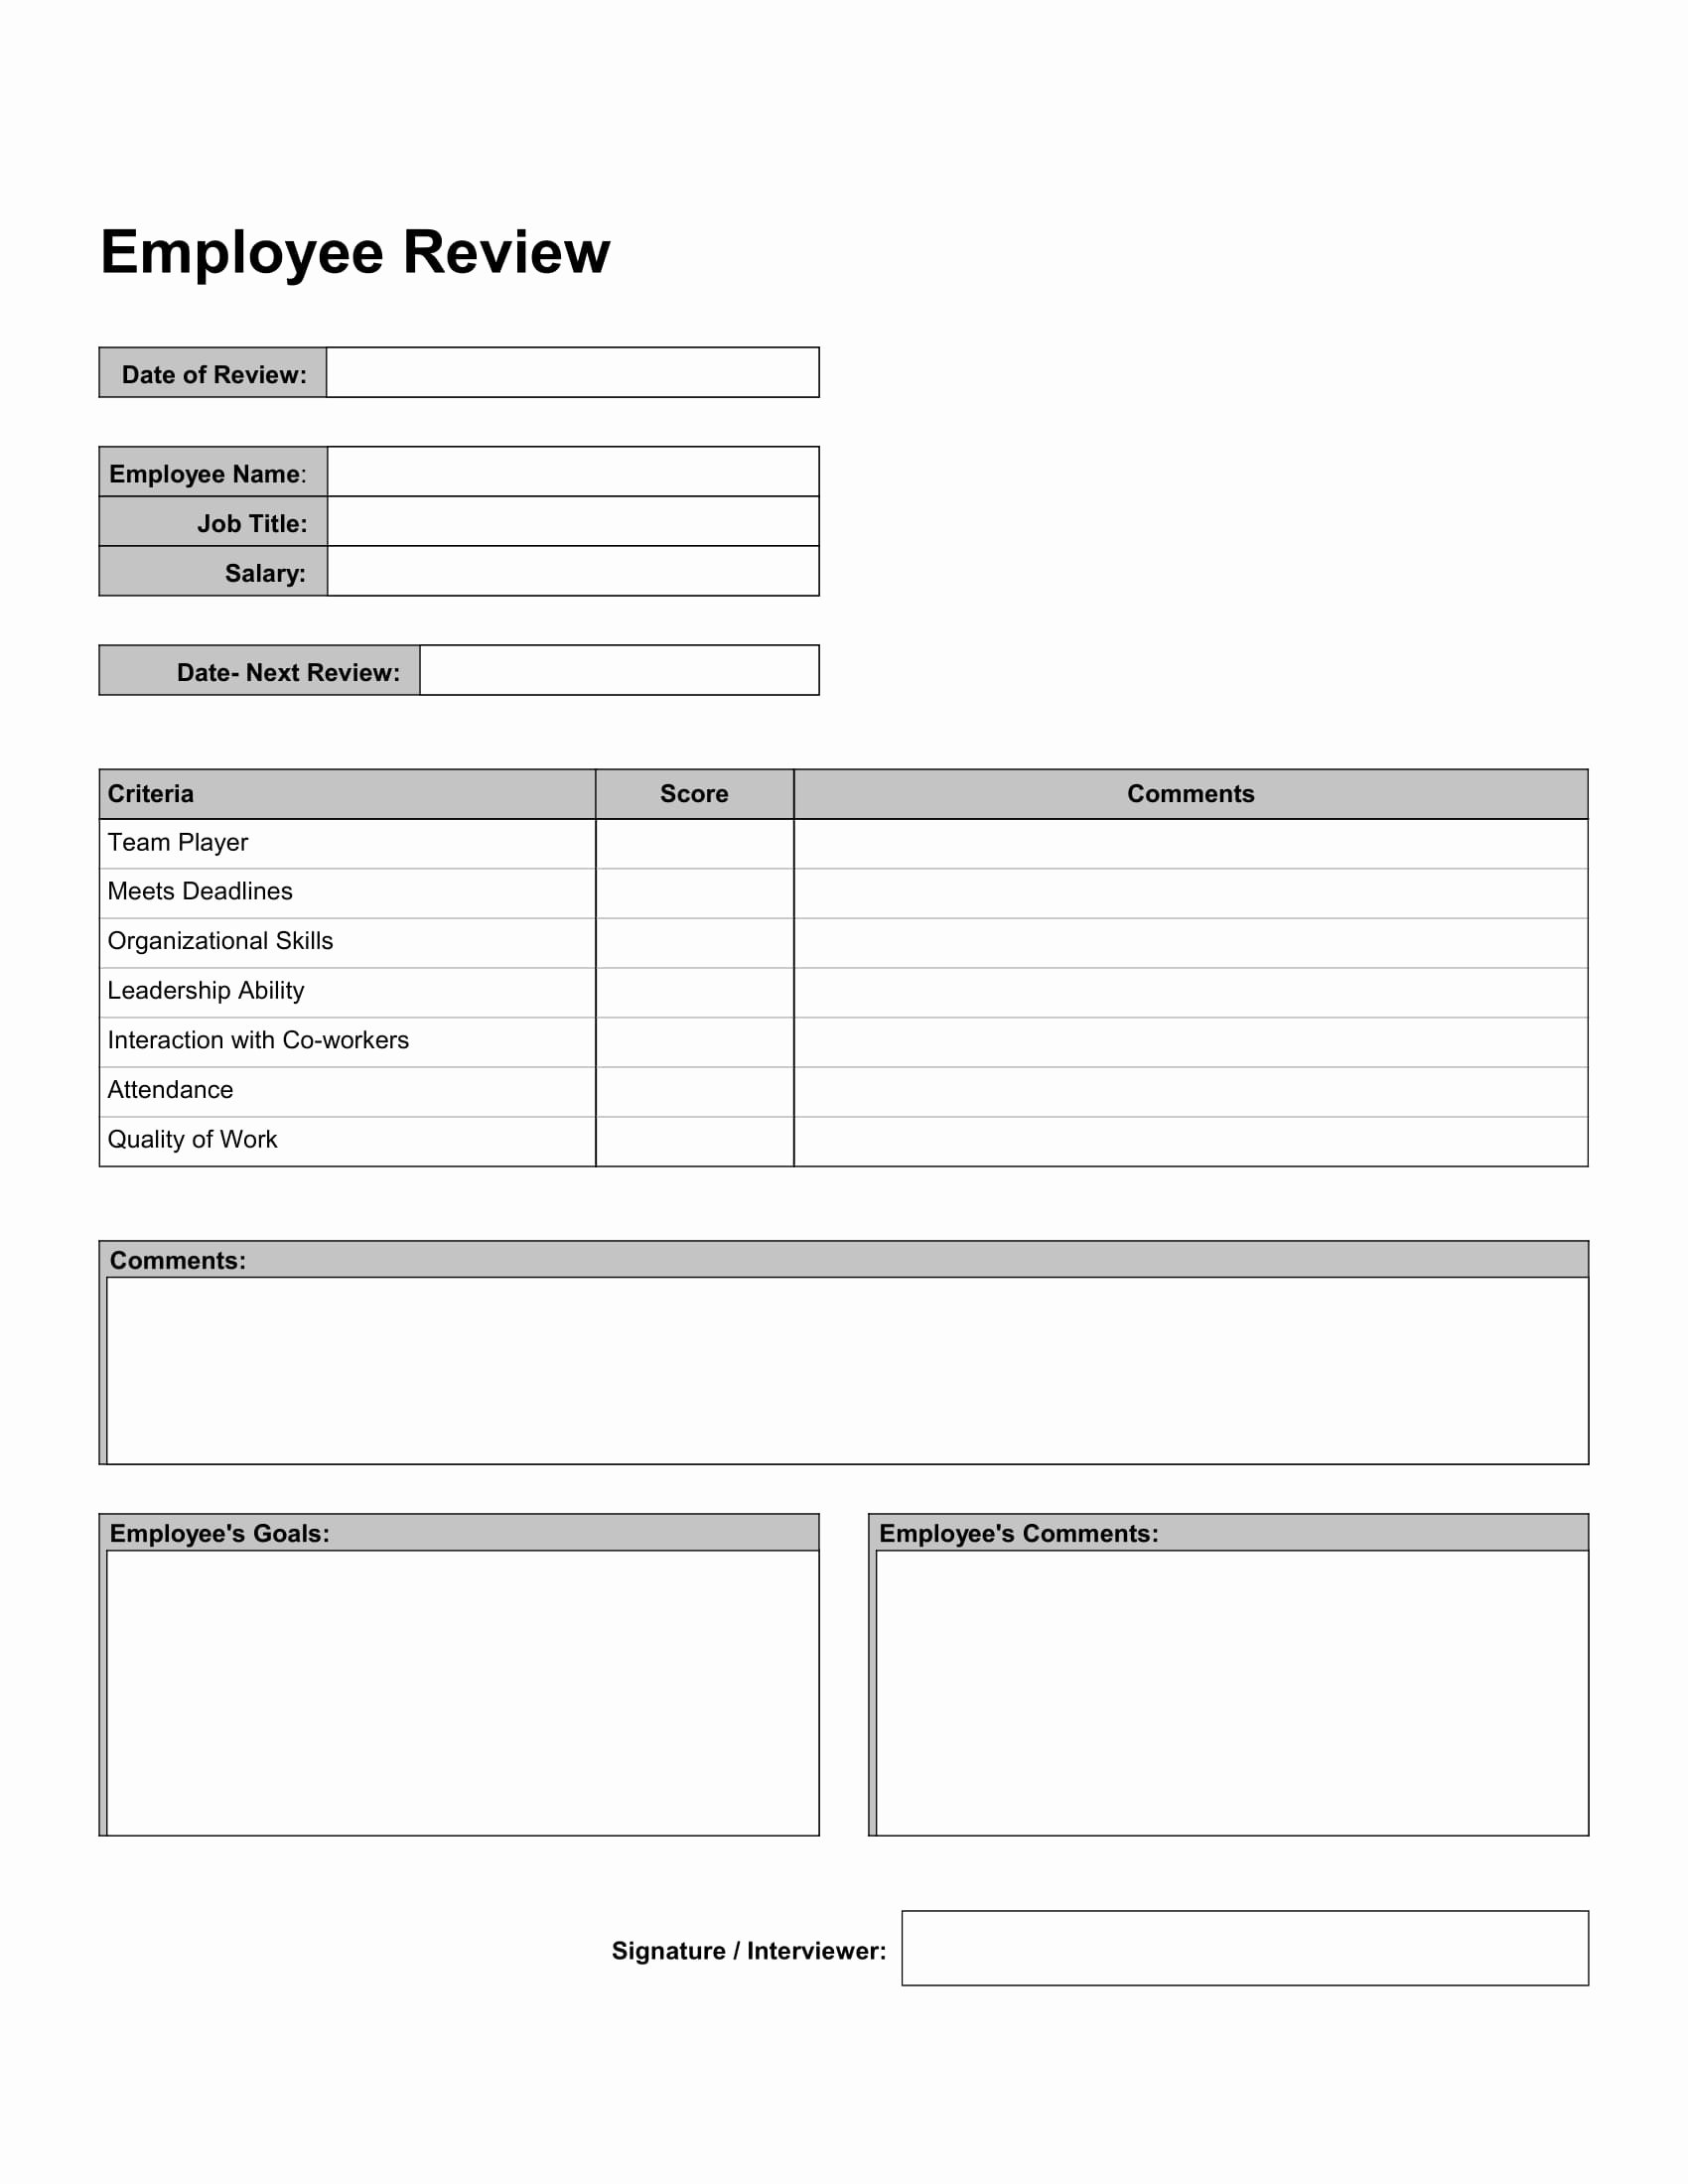 Employee Annual Review Template Fresh 10 Work Review forms Free Word Pdf format Download